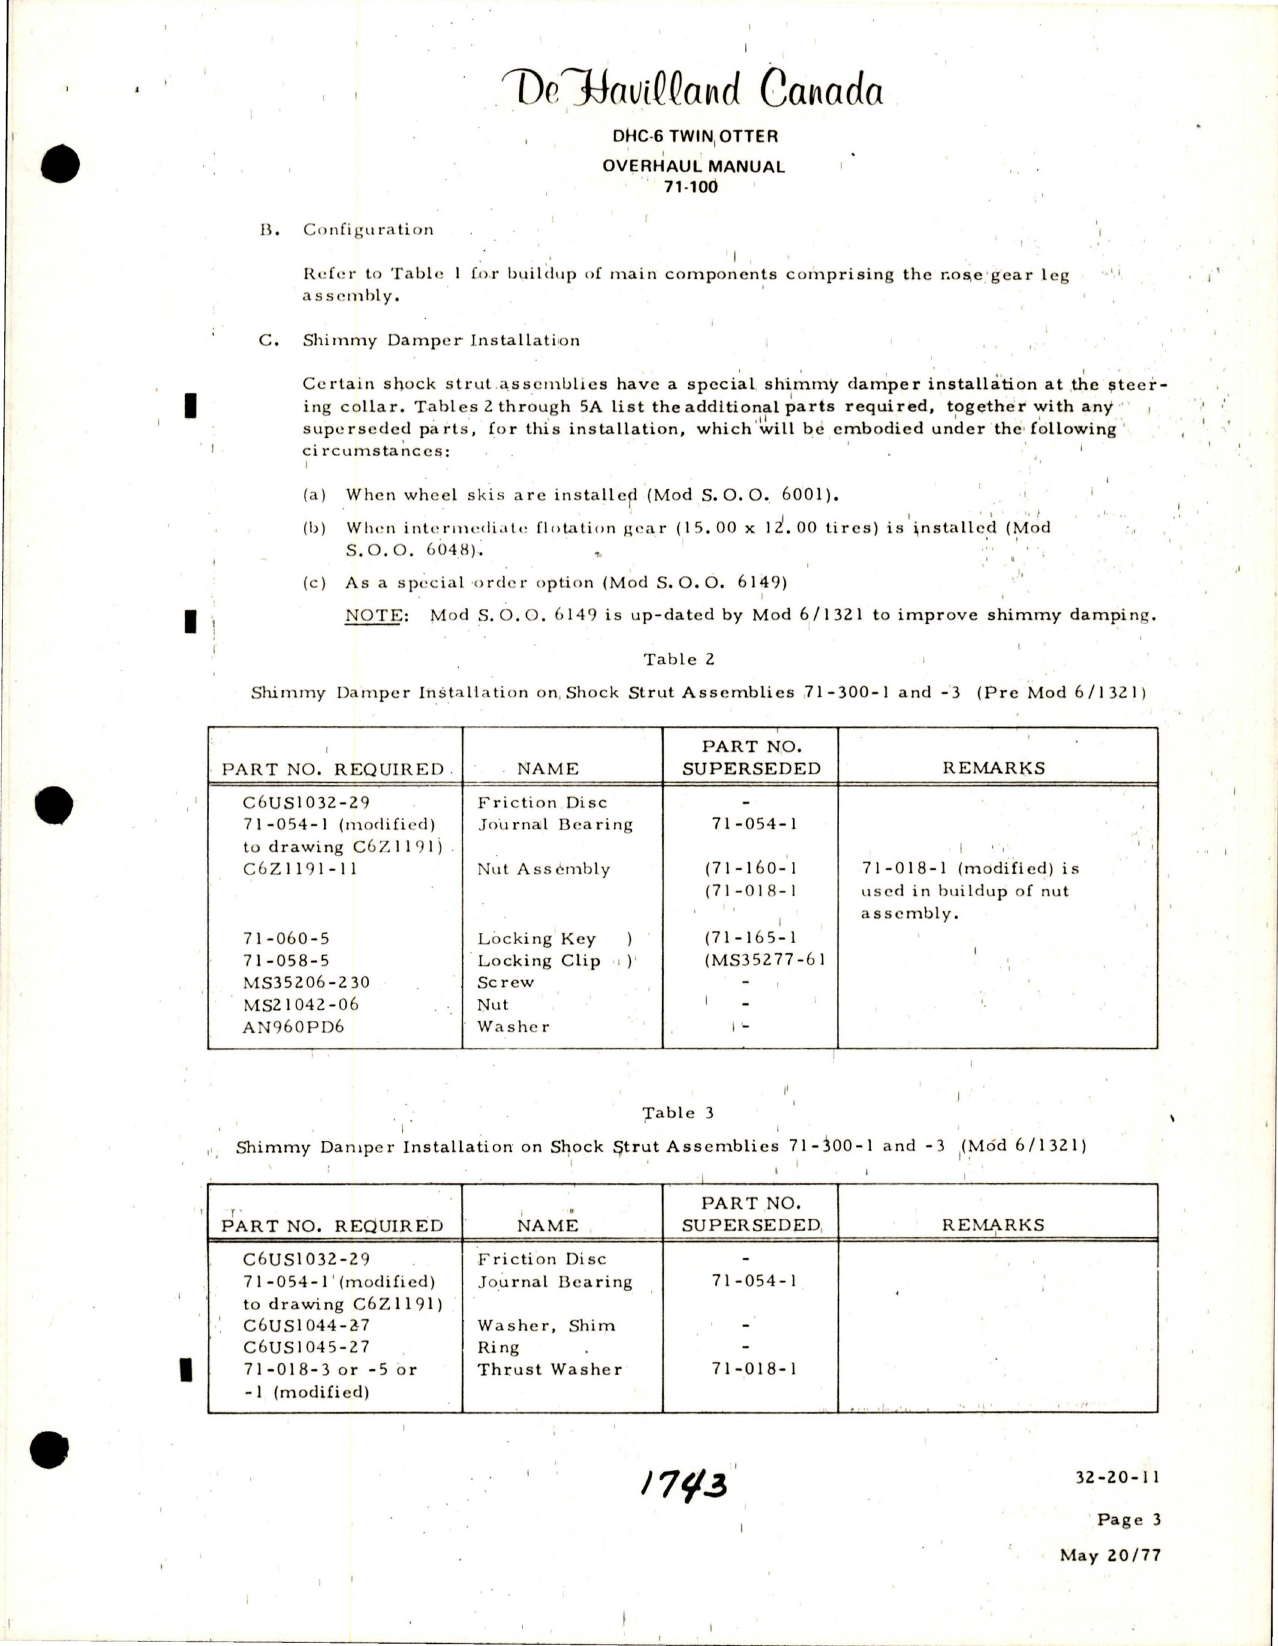 Sample page 9 from AirCorps Library document: Overhaul Manual for DHC-6 Twin Otter Nose Gear Leg Assembly - Part 71-100 